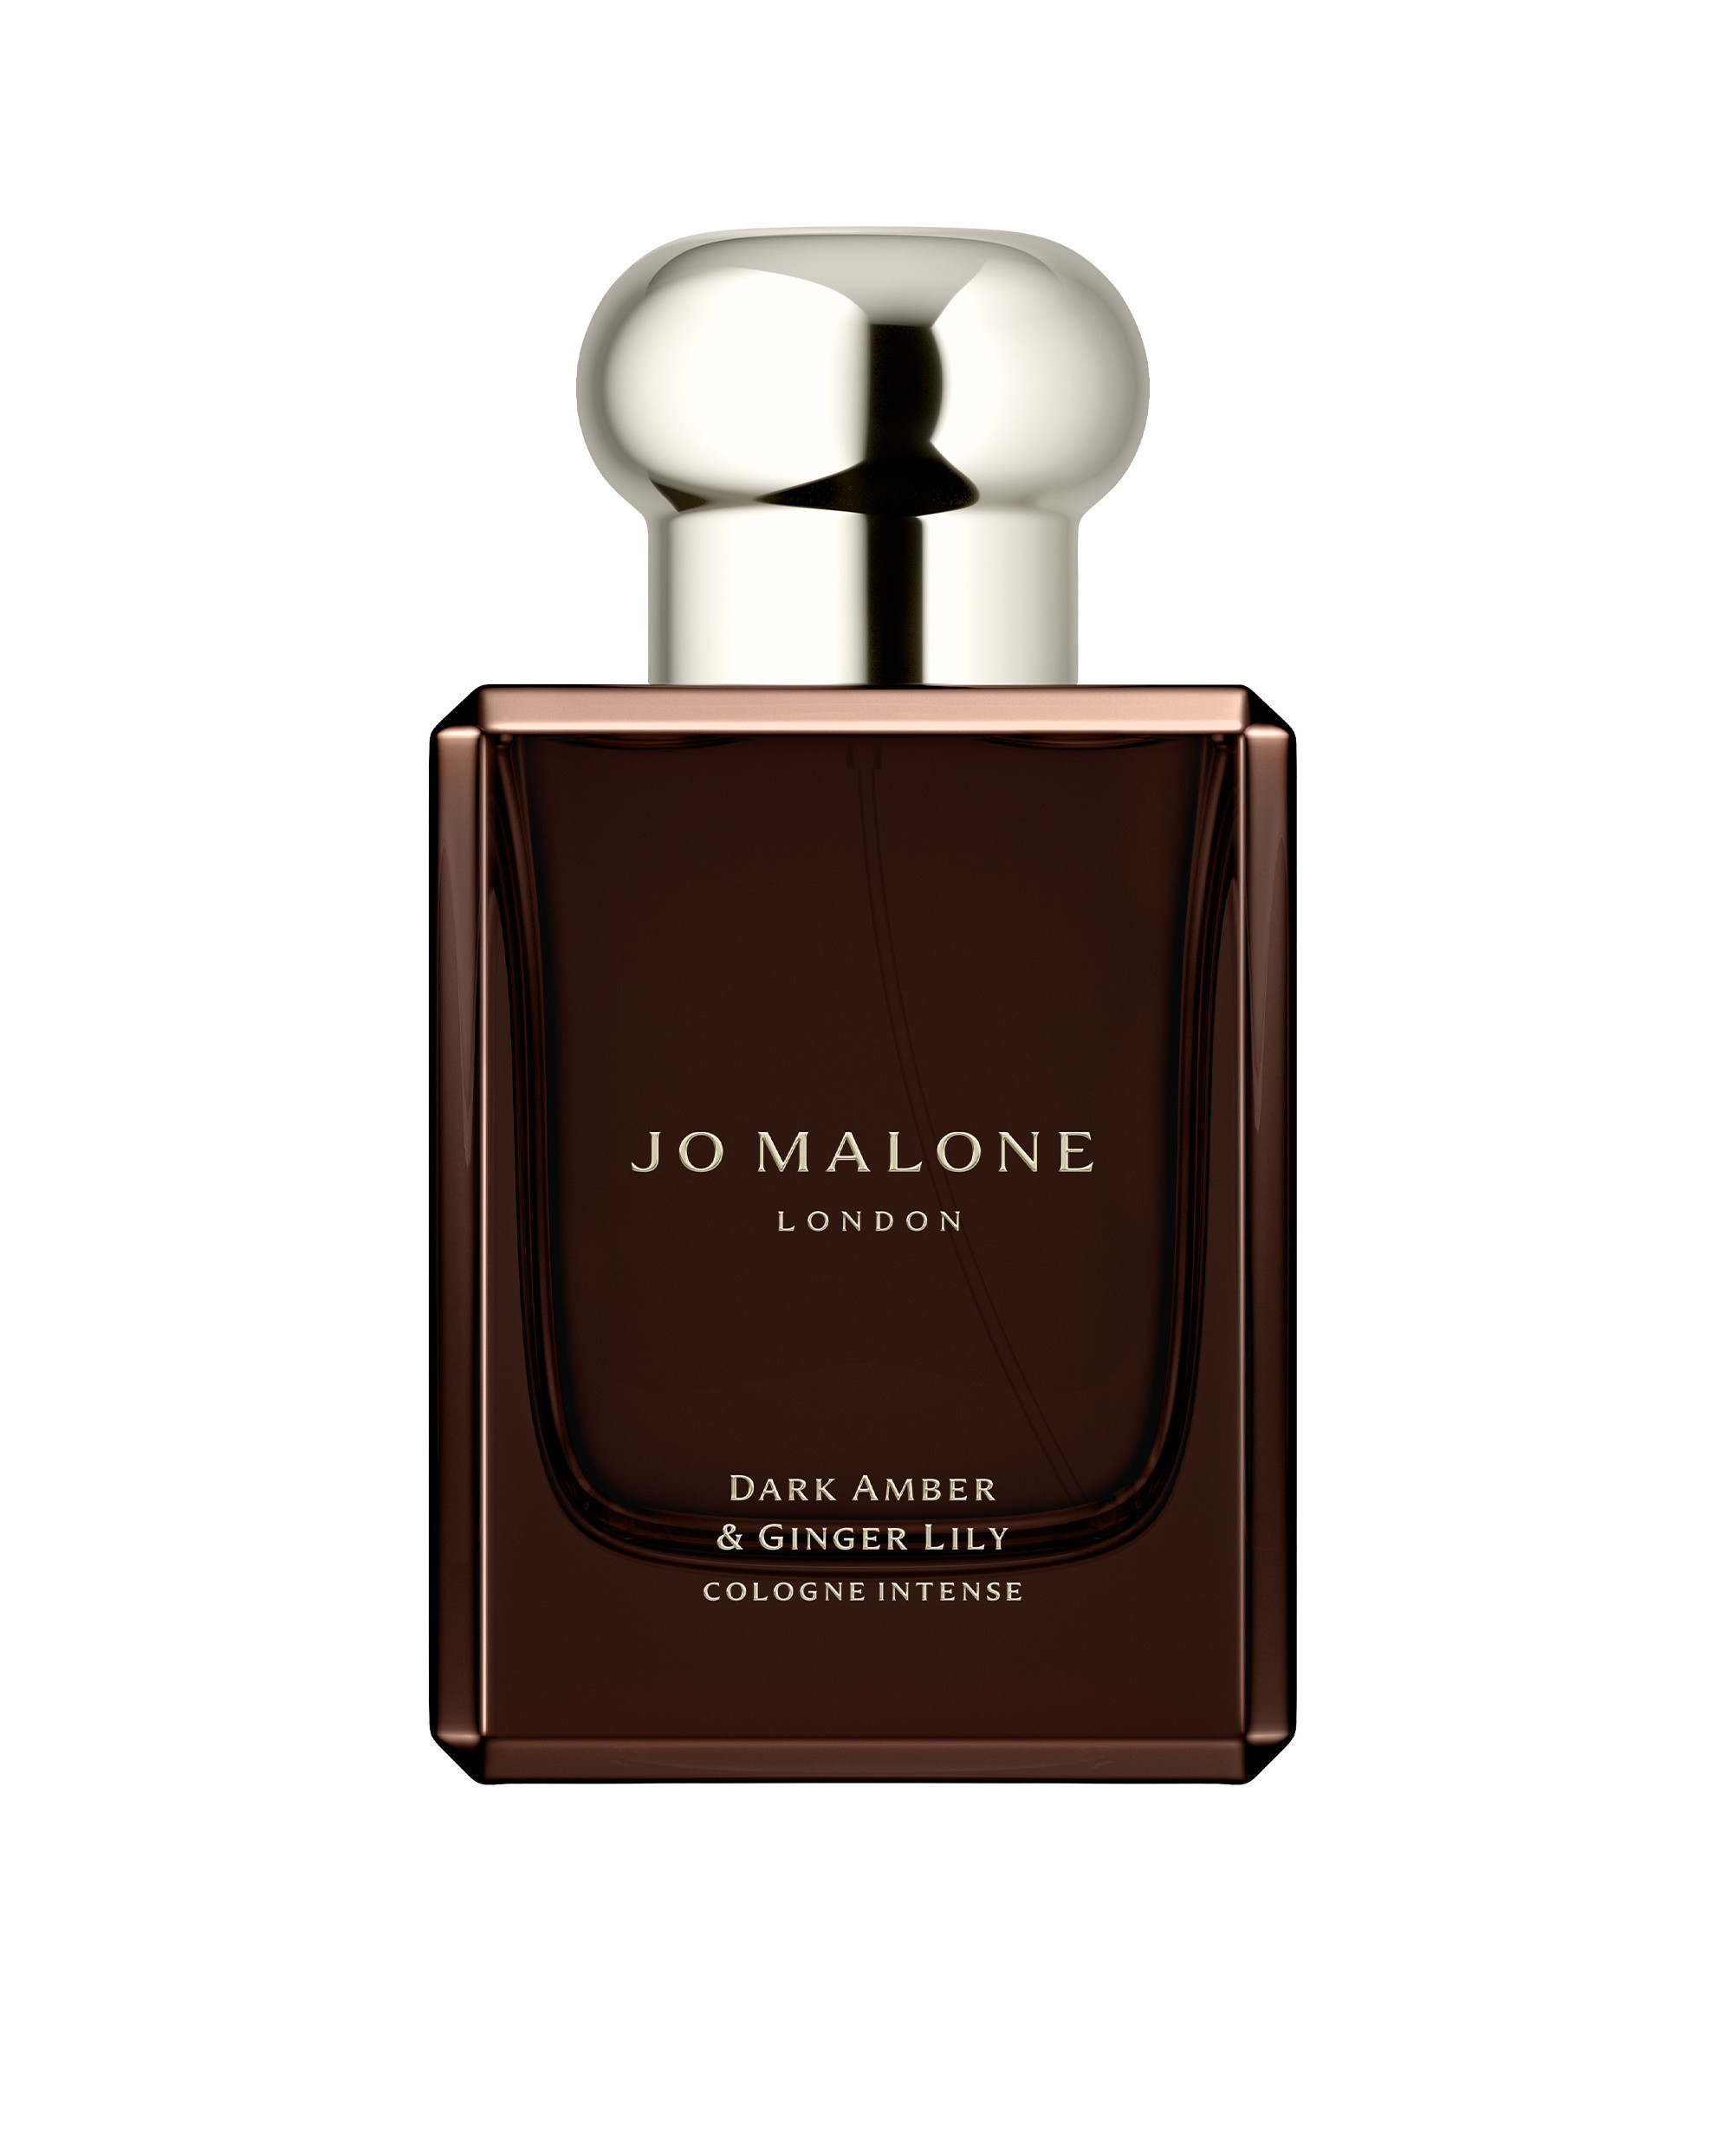 Jo Malone Dark Amber & Ginger Lily Cologne Intense 50 ml, Brown, large image number 0